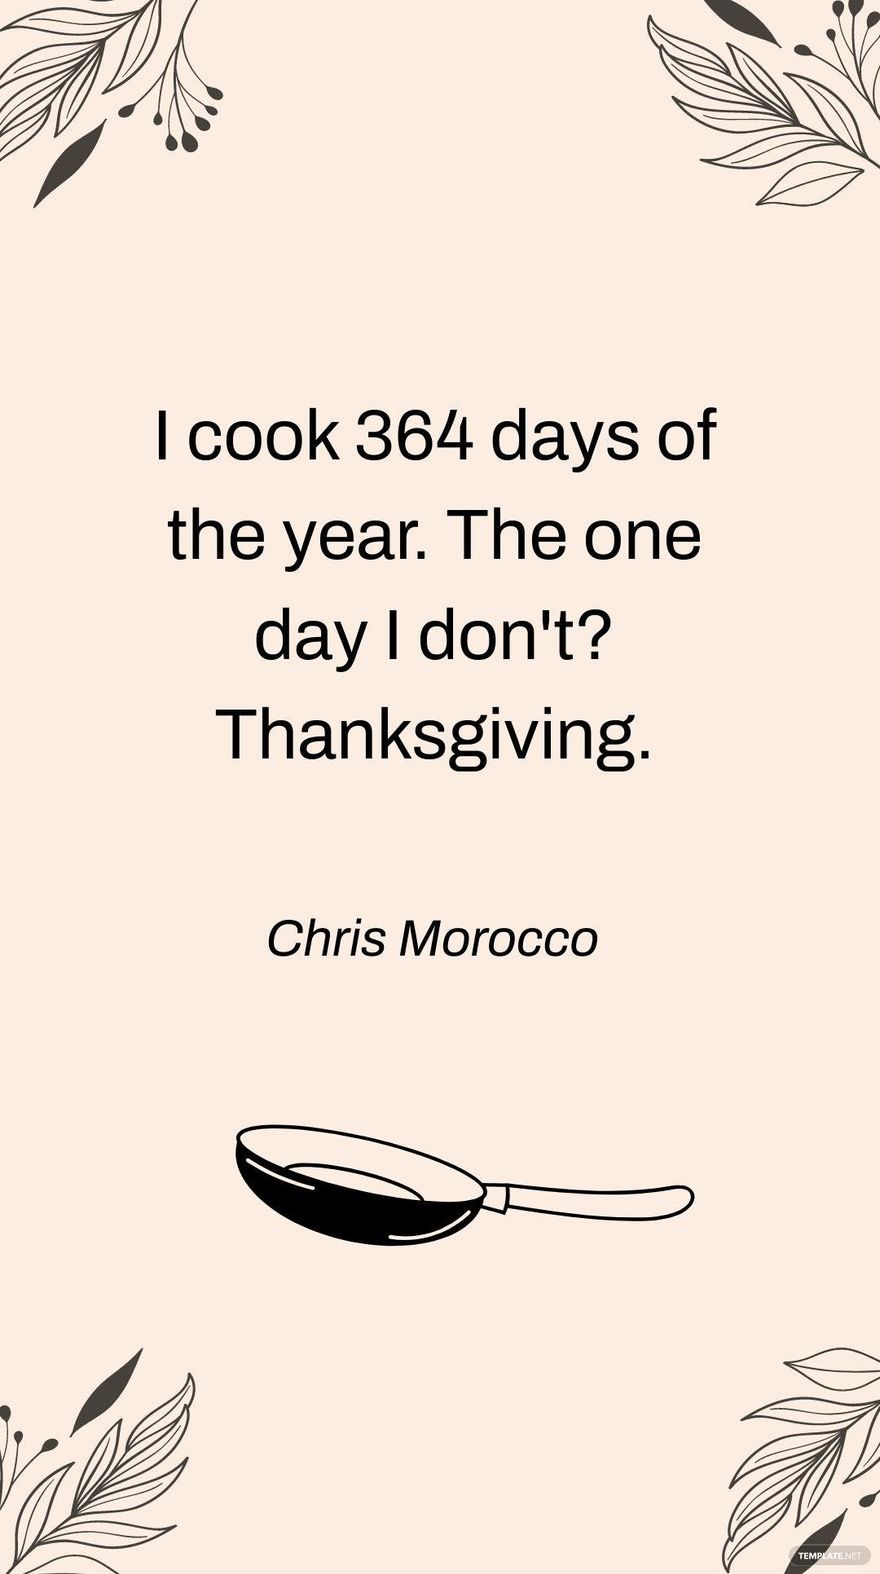 Chris Morocco - I cook 364 days of the year. The one day I don't? Thanksgiving.